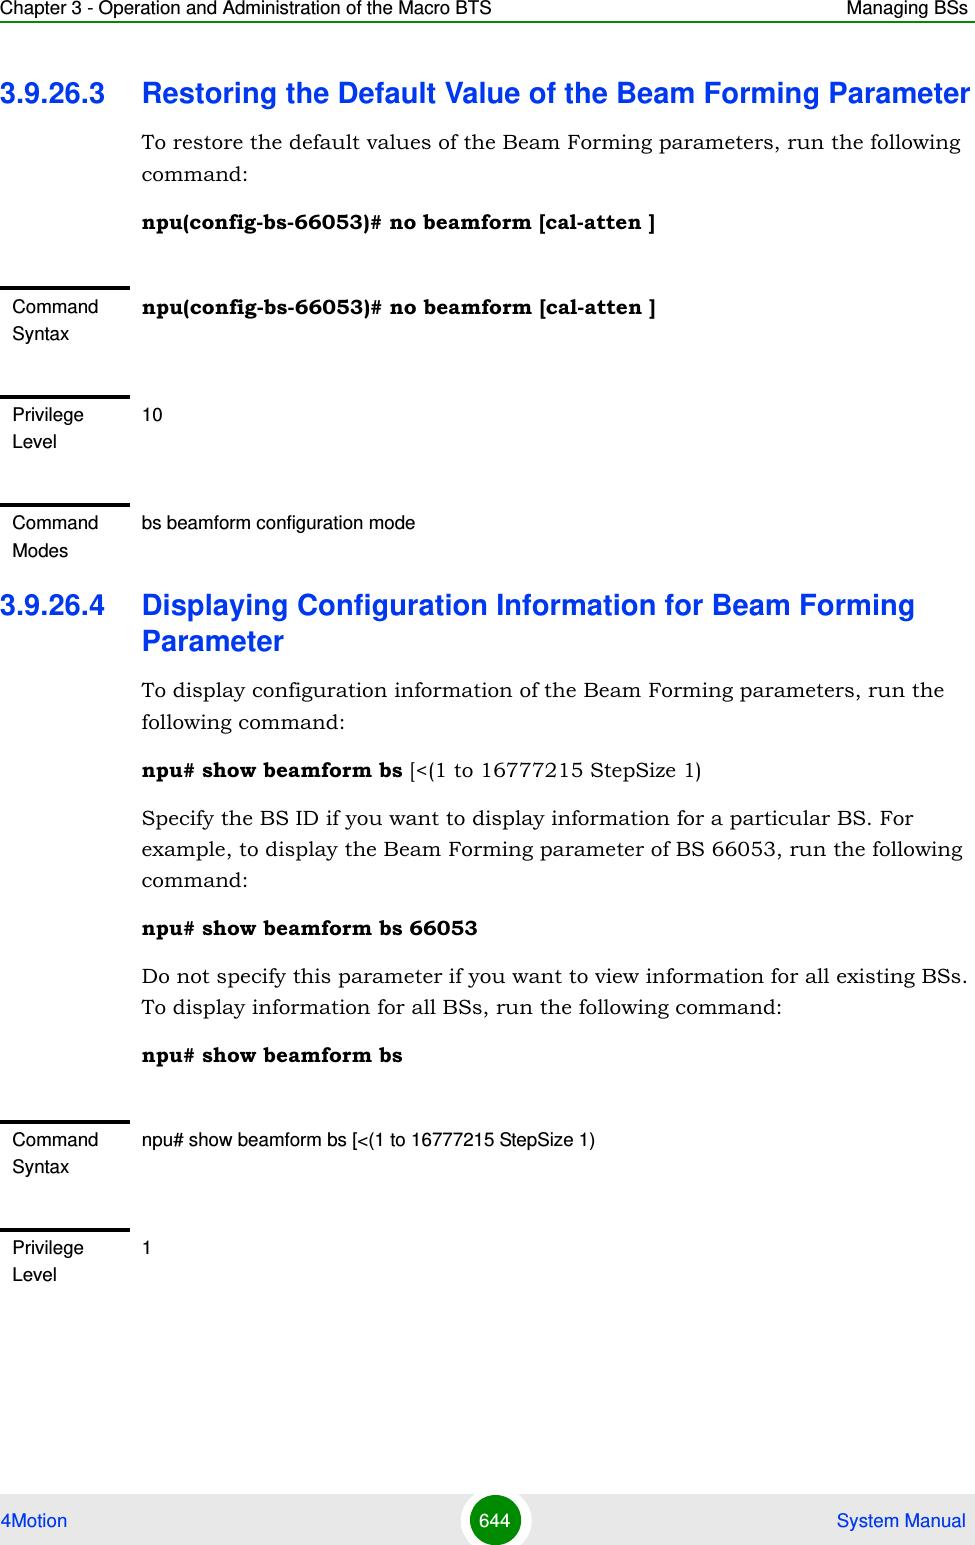 Chapter 3 - Operation and Administration of the Macro BTS Managing BSs4Motion 644  System Manual3.9.26.3 Restoring the Default Value of the Beam Forming ParameterTo restore the default values of the Beam Forming parameters, run the following command:npu(config-bs-66053)# no beamform [cal-atten ]3.9.26.4 Displaying Configuration Information for Beam Forming ParameterTo display configuration information of the Beam Forming parameters, run the following command:npu# show beamform bs [&lt;(1 to 16777215 StepSize 1)Specify the BS ID if you want to display information for a particular BS. For example, to display the Beam Forming parameter of BS 66053, run the following command:npu# show beamform bs 66053Do not specify this parameter if you want to view information for all existing BSs. To display information for all BSs, run the following command:npu# show beamform bsCommand Syntaxnpu(config-bs-66053)# no beamform [cal-atten ]Privilege Level10Command Modesbs beamform configuration modeCommand Syntaxnpu# show beamform bs [&lt;(1 to 16777215 StepSize 1)Privilege Level1